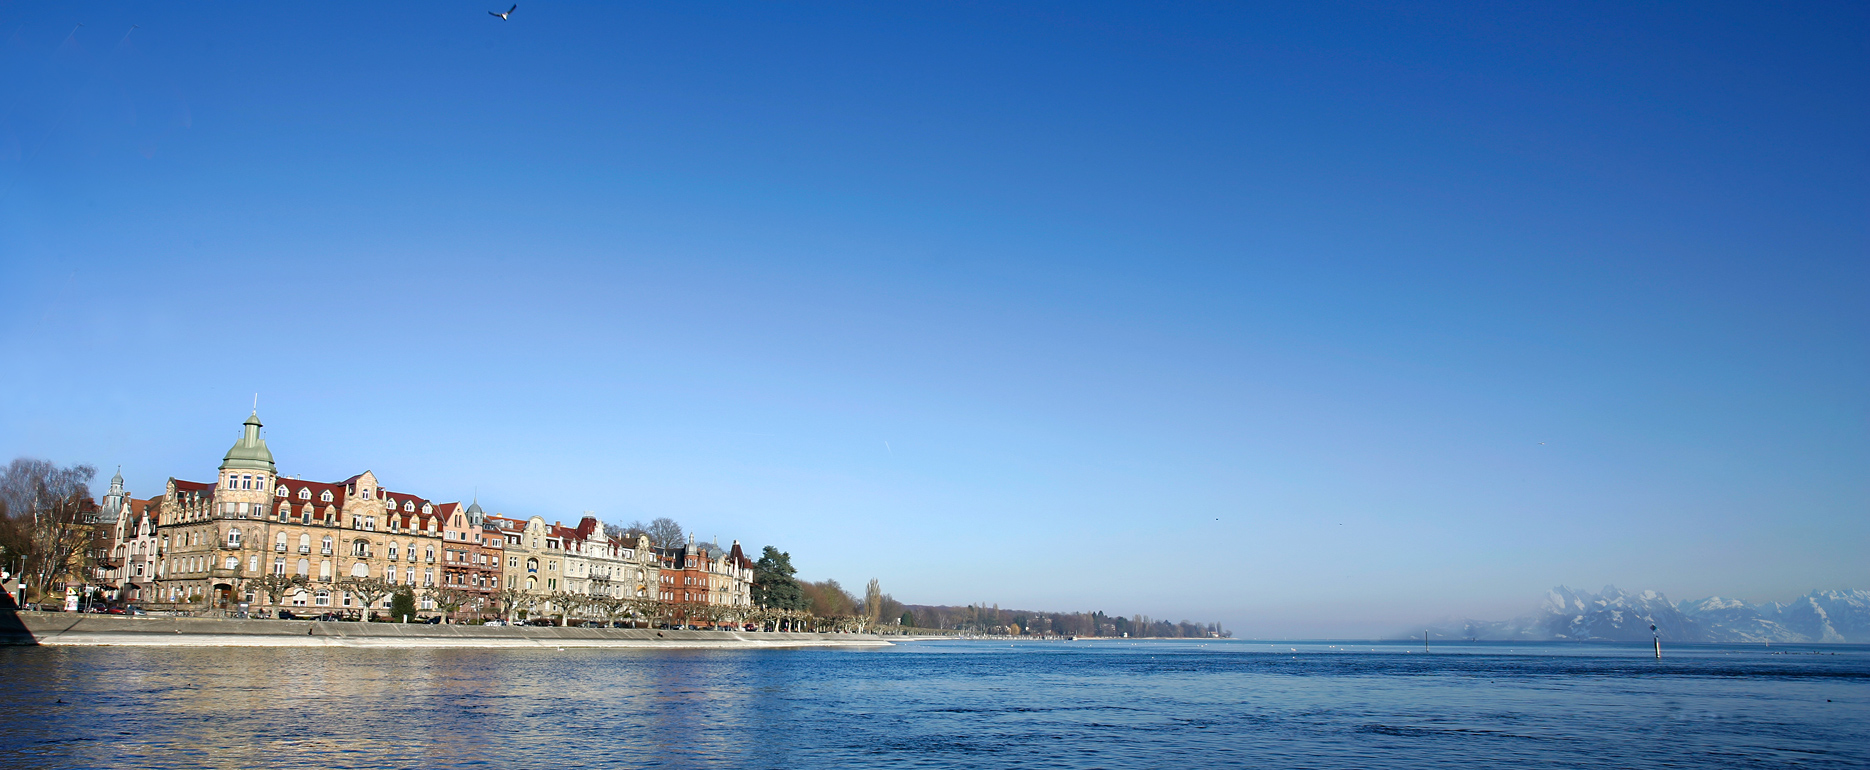 Lake Constance at the Old Rhine Bridge in Konstanz with a view of houses on Seestraße